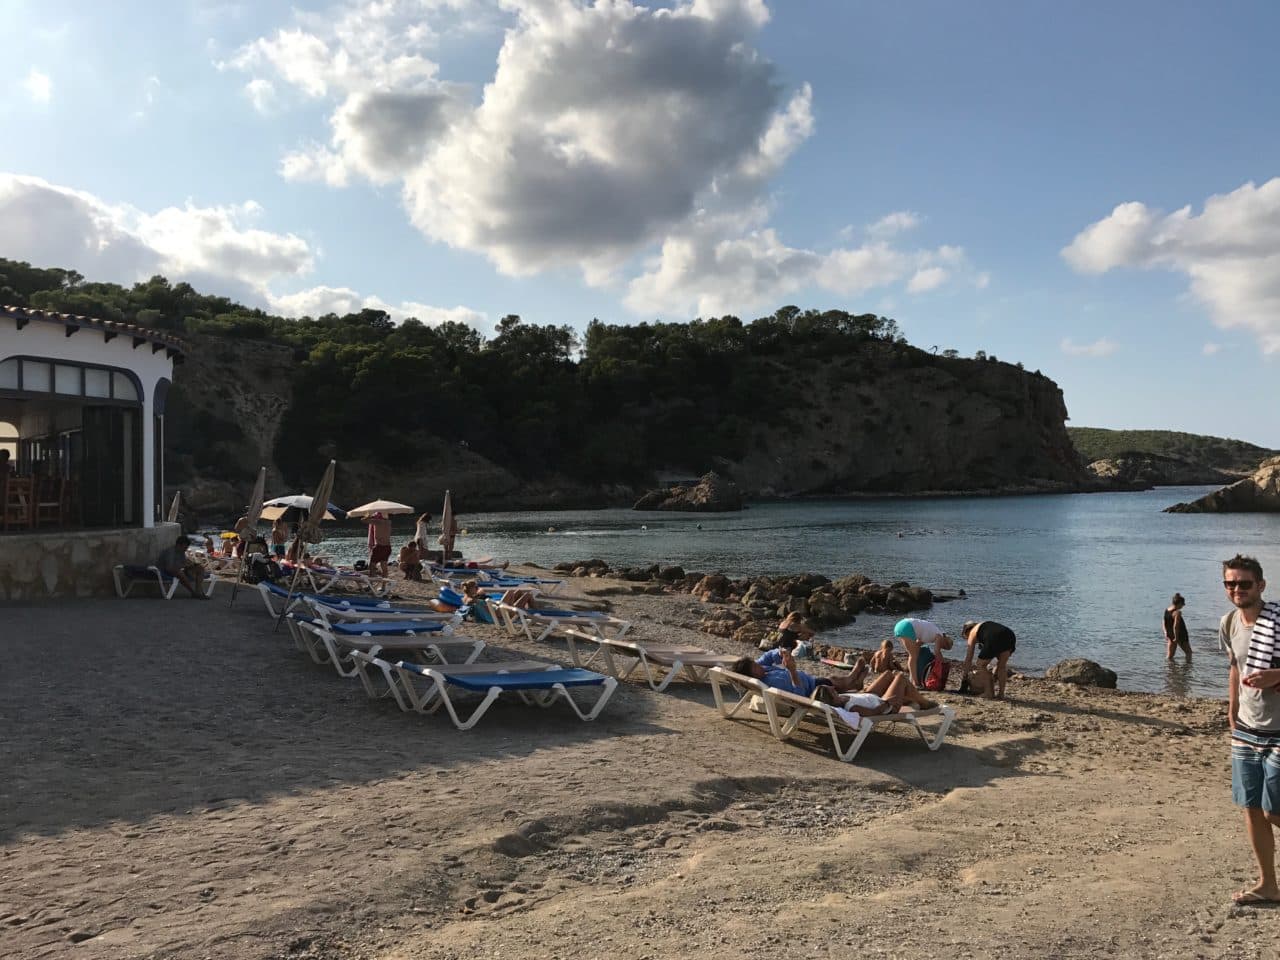 Sunbeds On A Gravel Beach With People